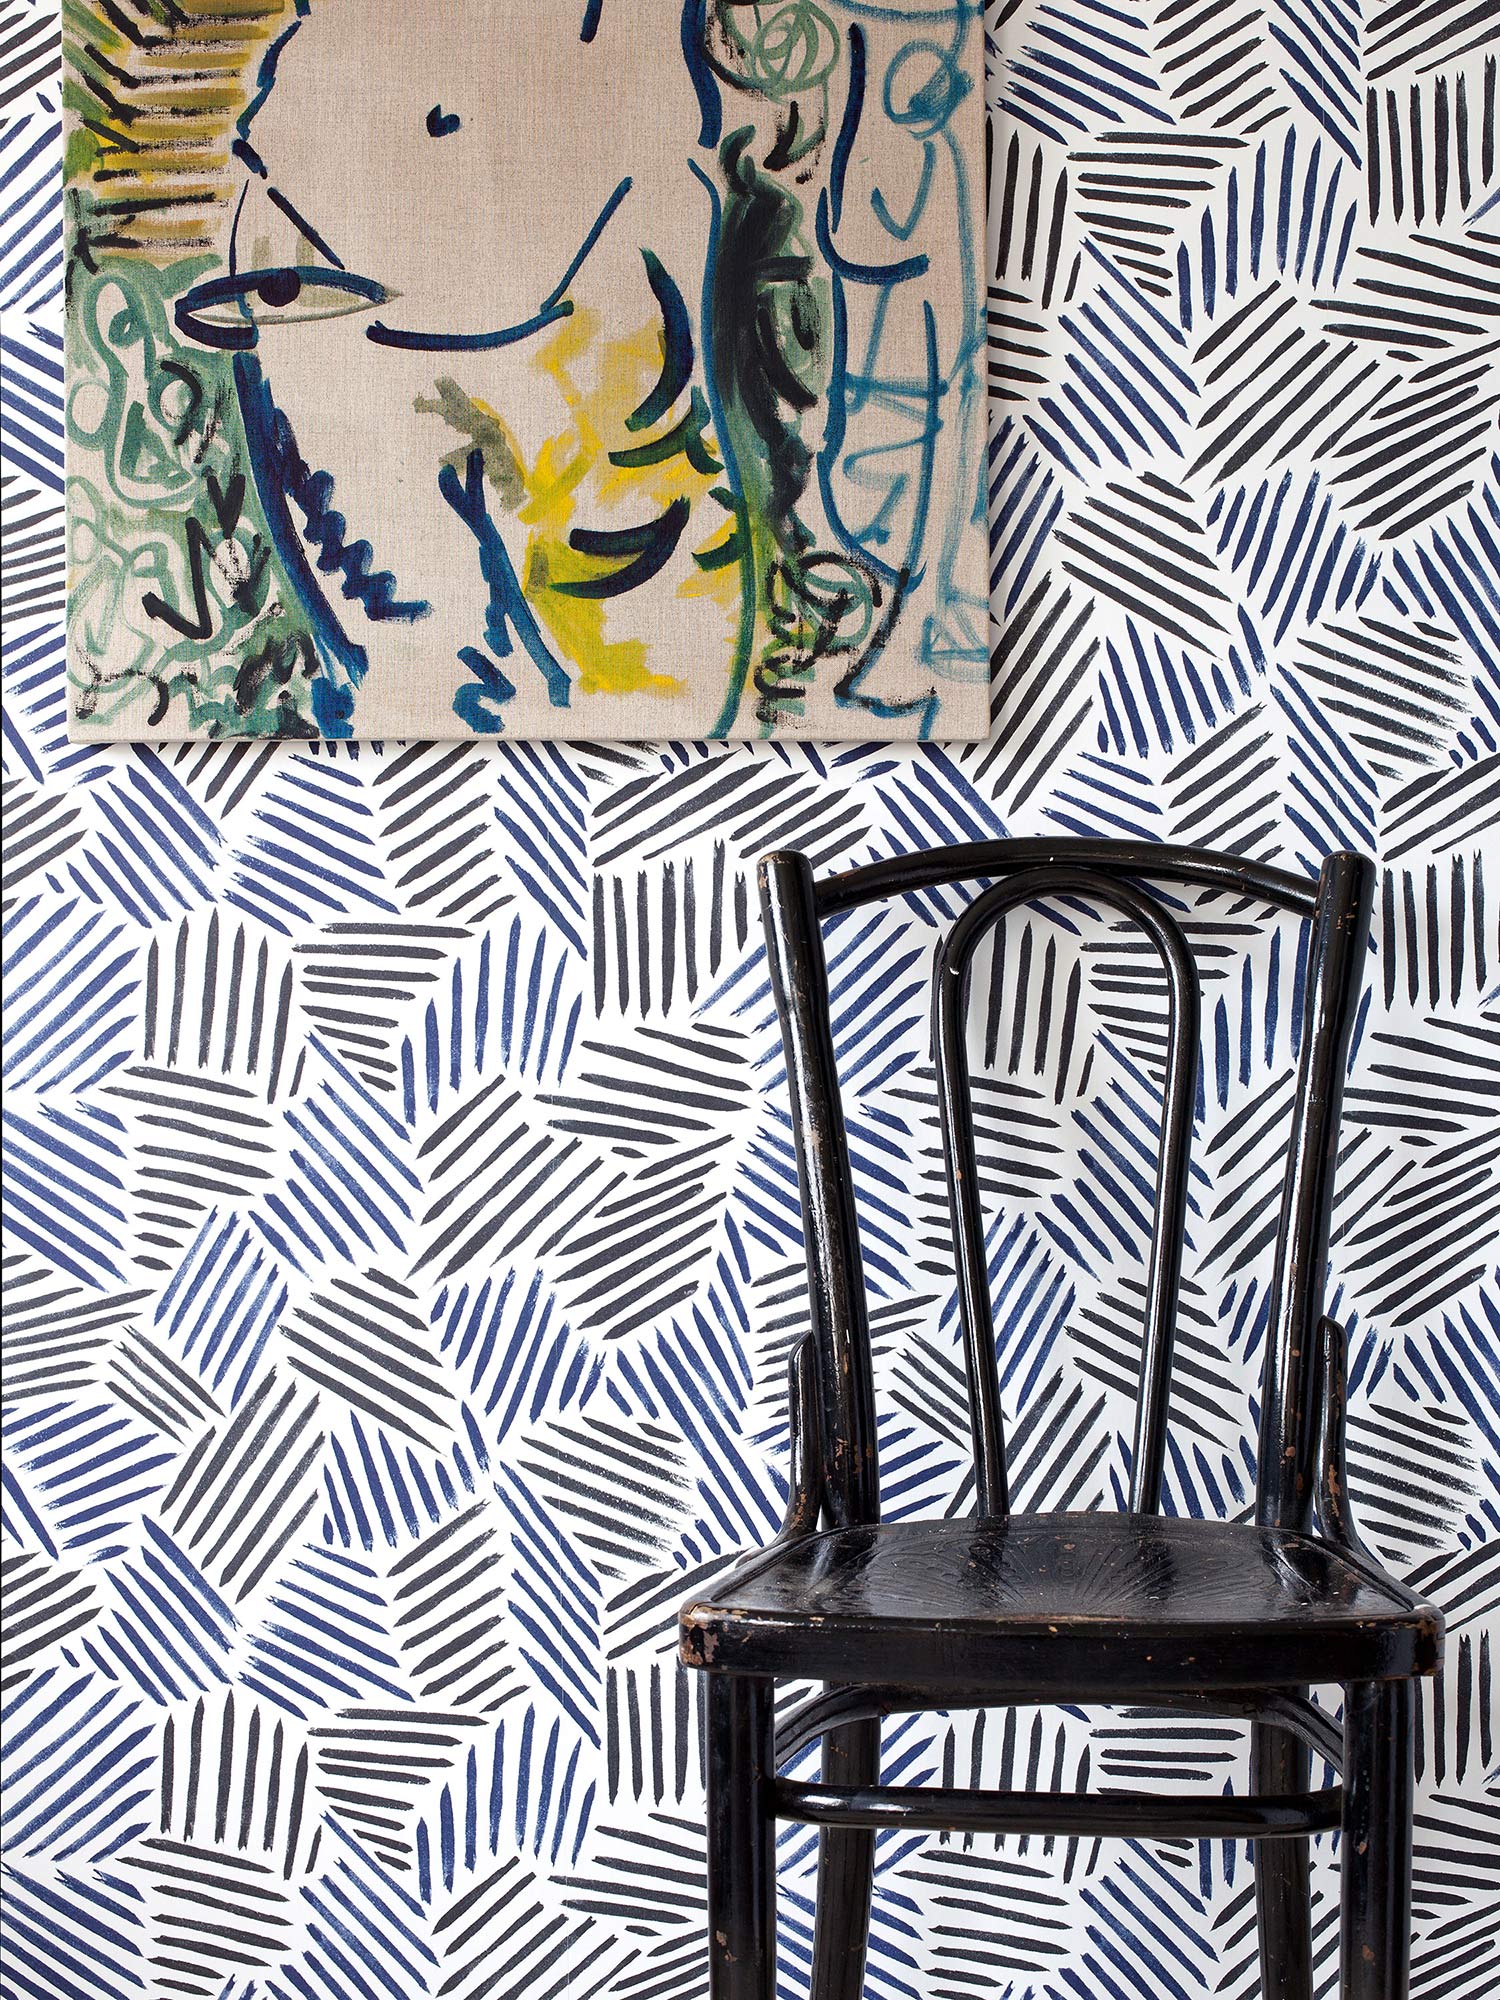 This wallpaper, inspired by New York artist Jasper Johns and the Bloomsbury Group, combines repeating black and navy blue brushstrokes to create a modern, abstract striped design, pictured with black chair and modern nude artwork